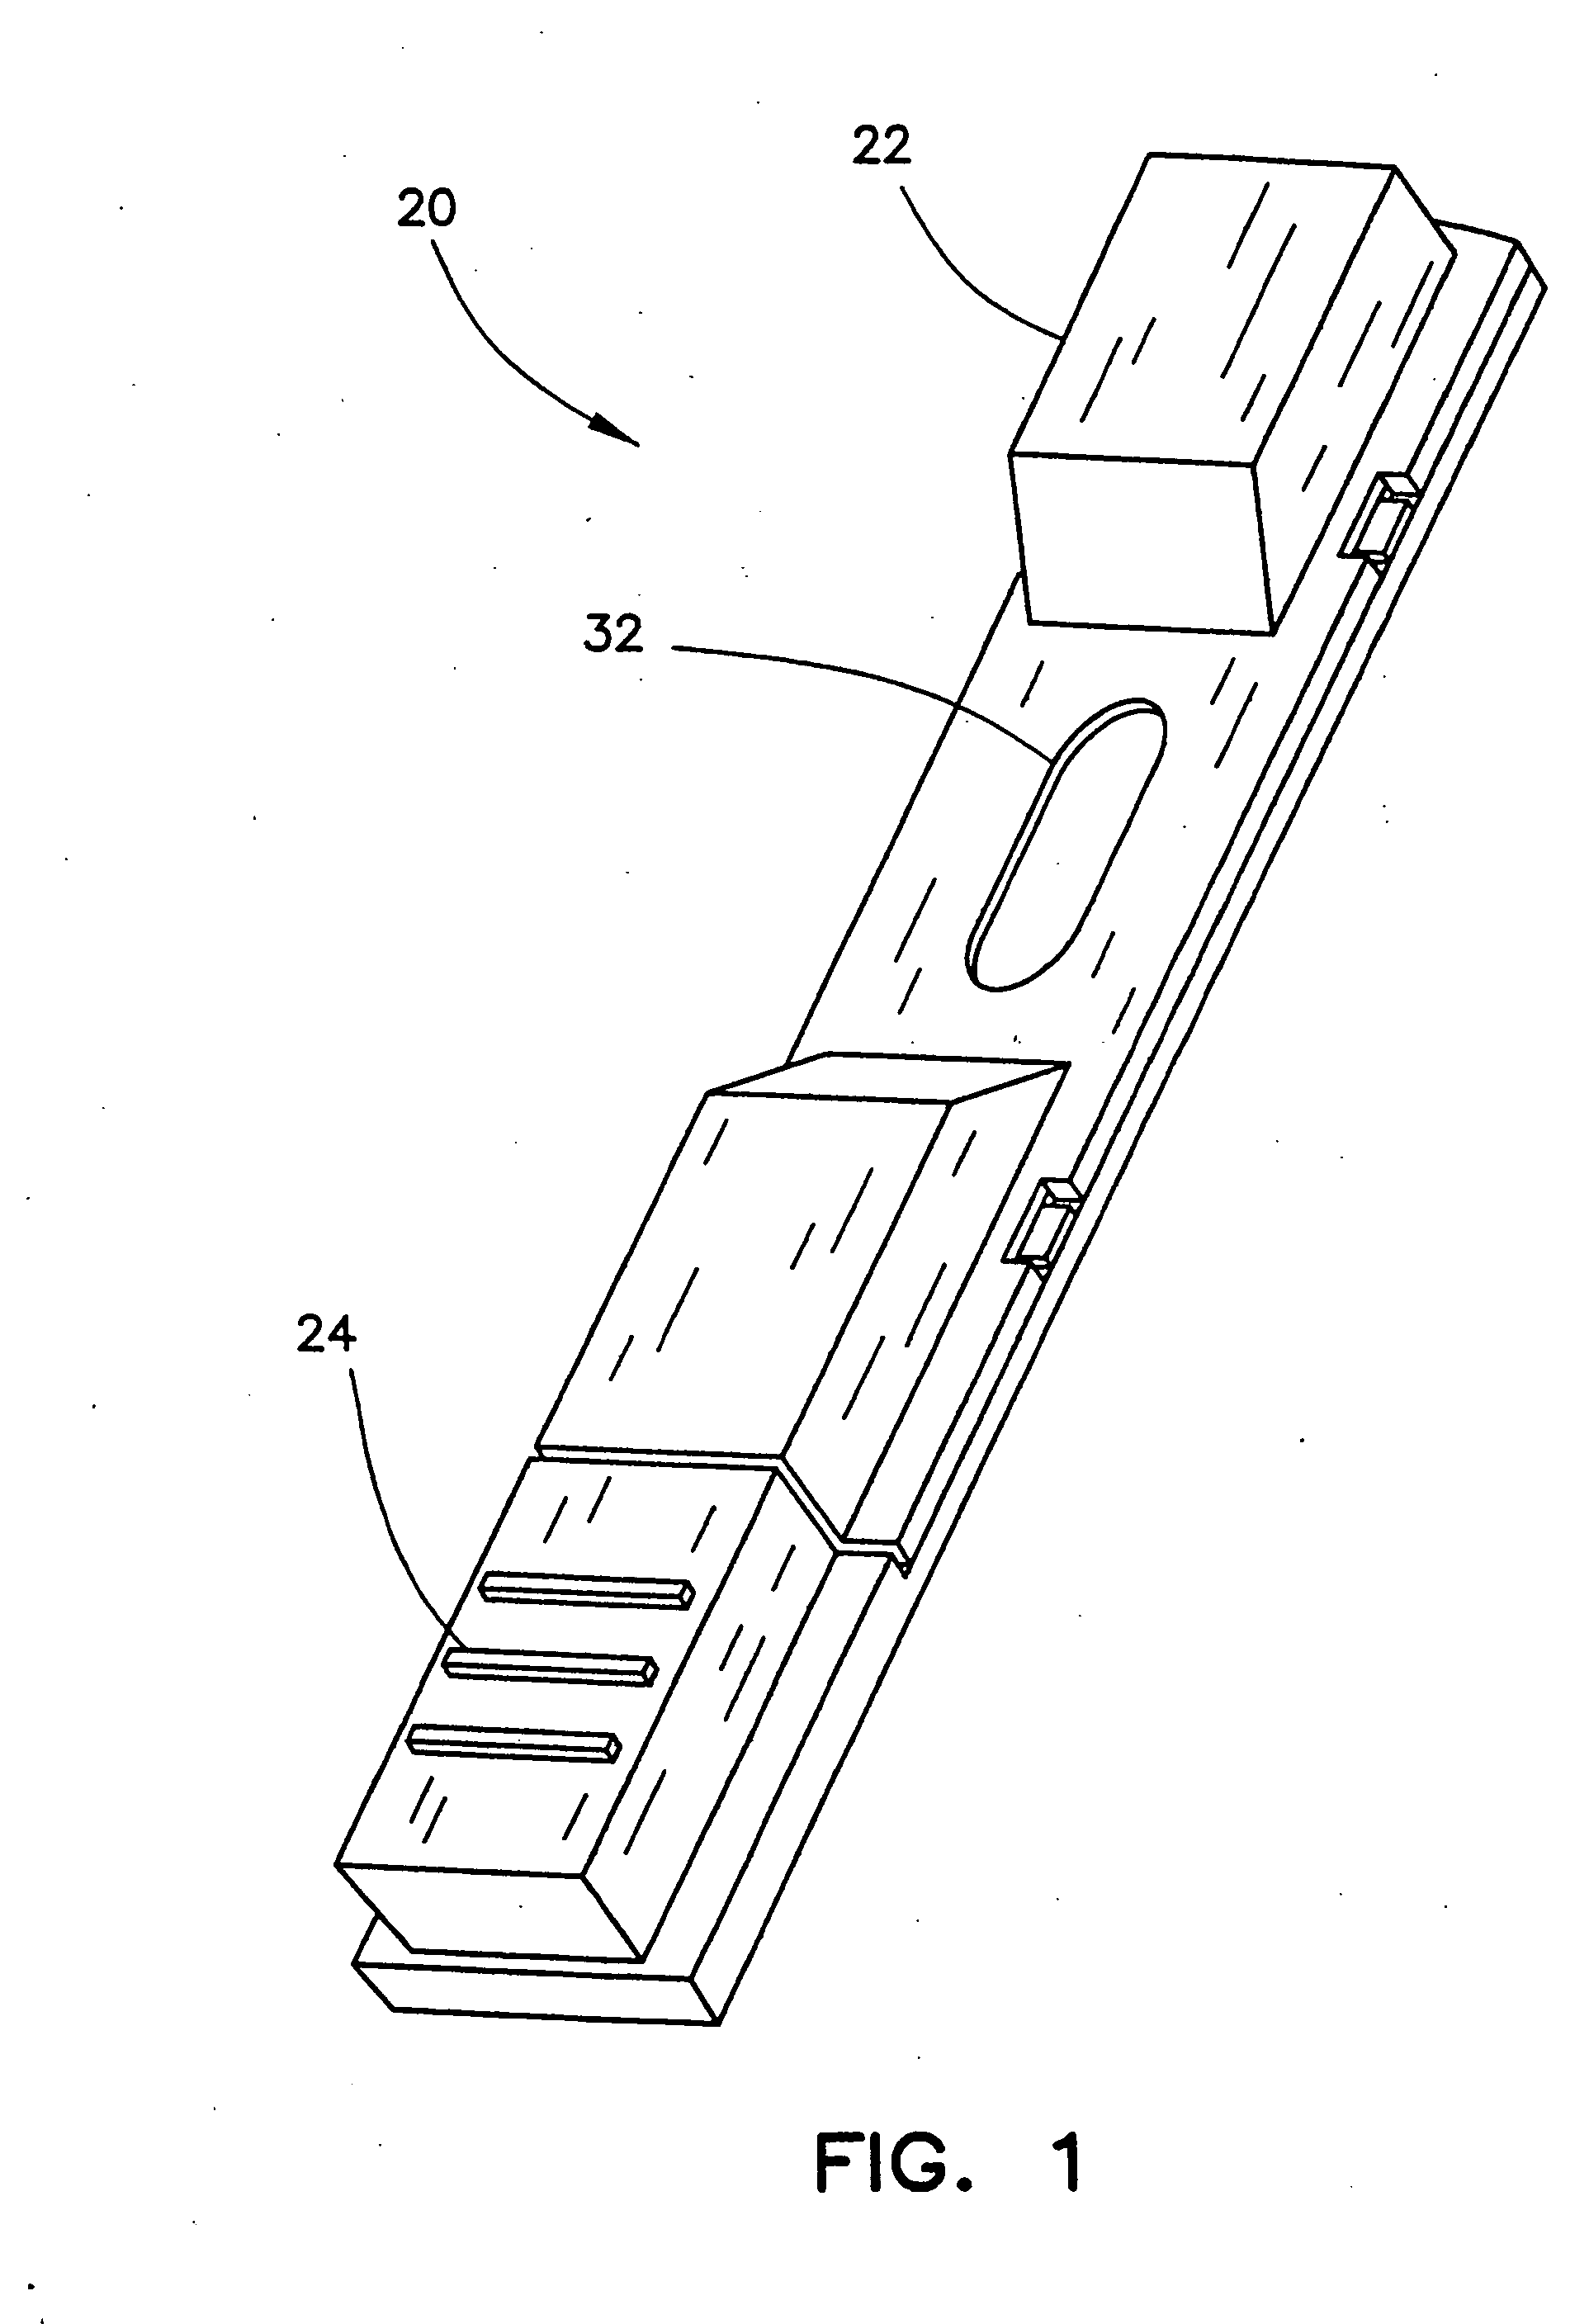 Test strip for determining concentration of multiple analytes in a single fluid sample